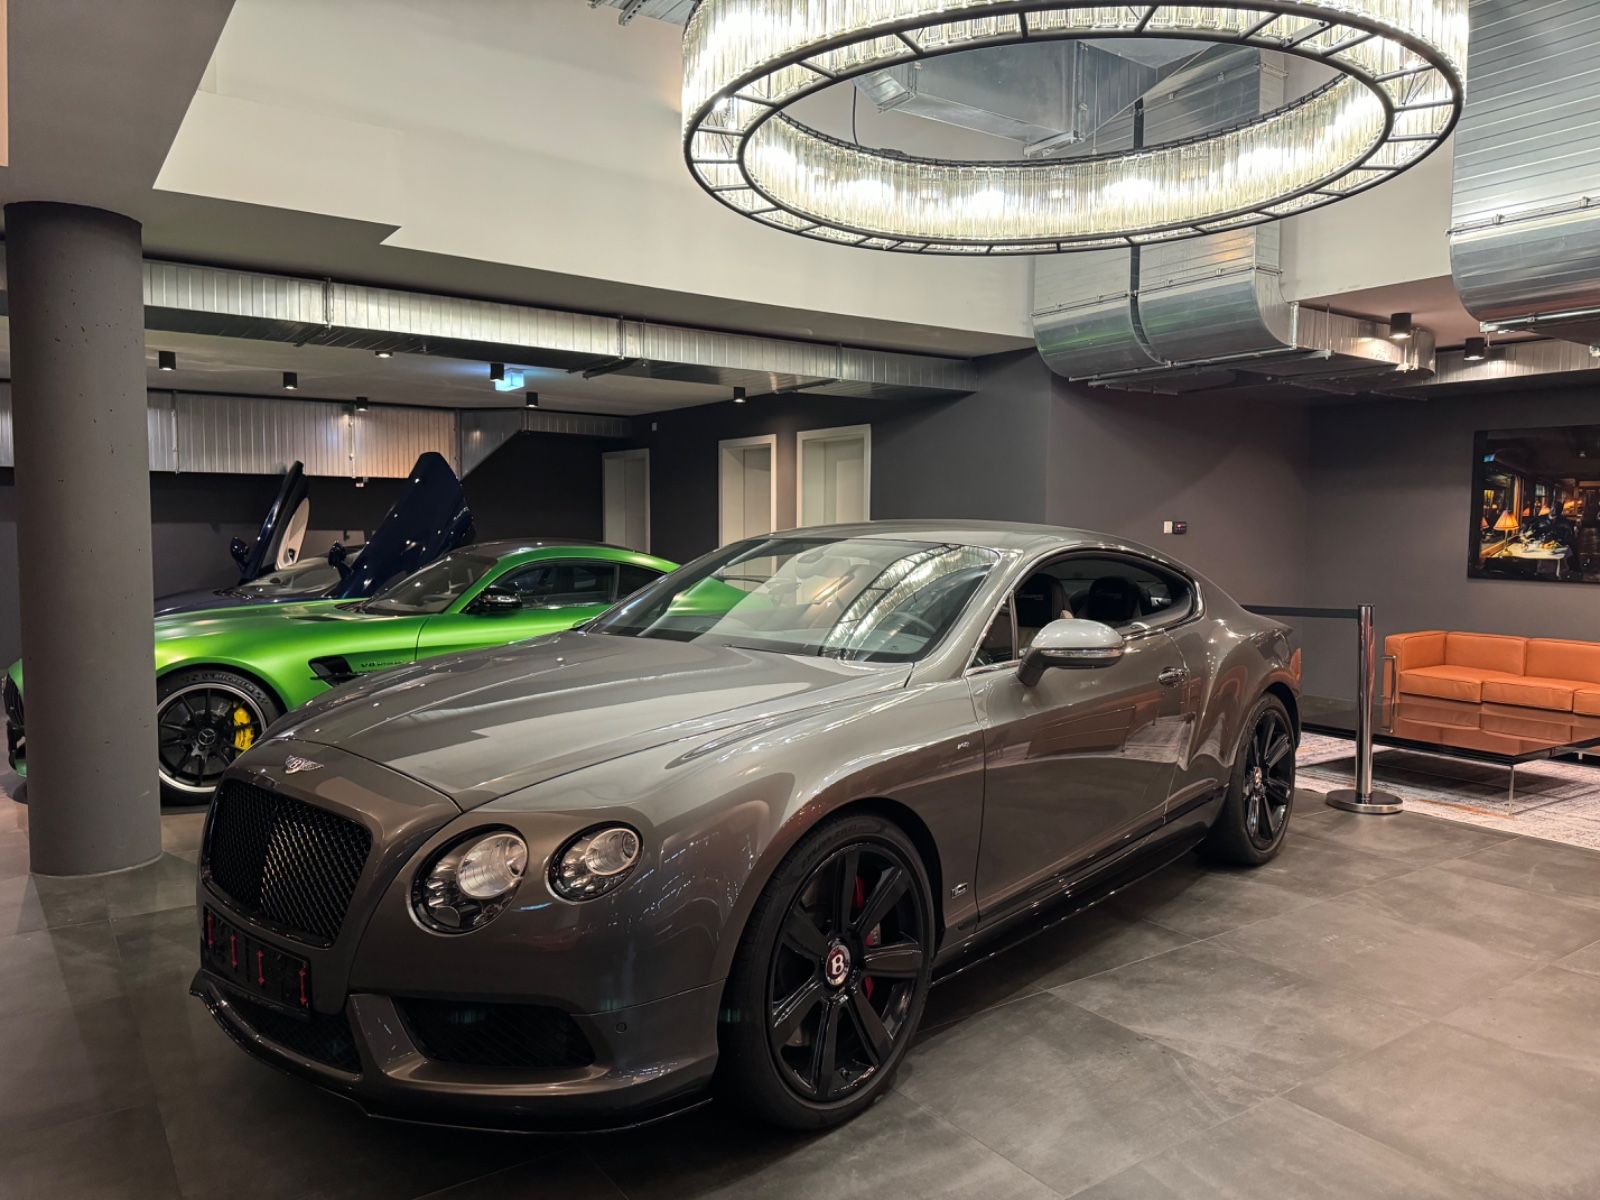 Bentley Continental GT Continental GT 4.0 V8S CONCURS EDITION LIMITED